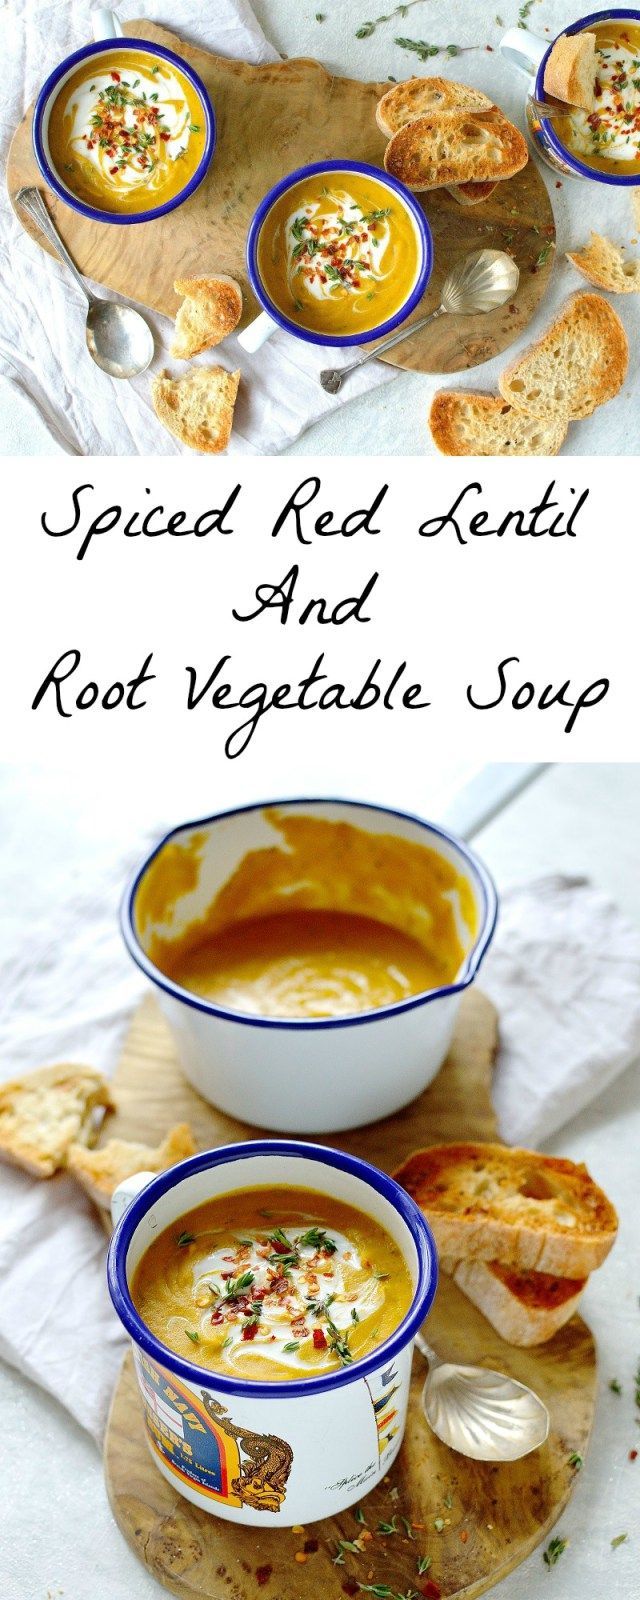 Vegan spiced red lentil and root vegetable soup - a hearty, healthy and filling soup that is quick and easy to make. -   20 vegetable recipes quick
 ideas